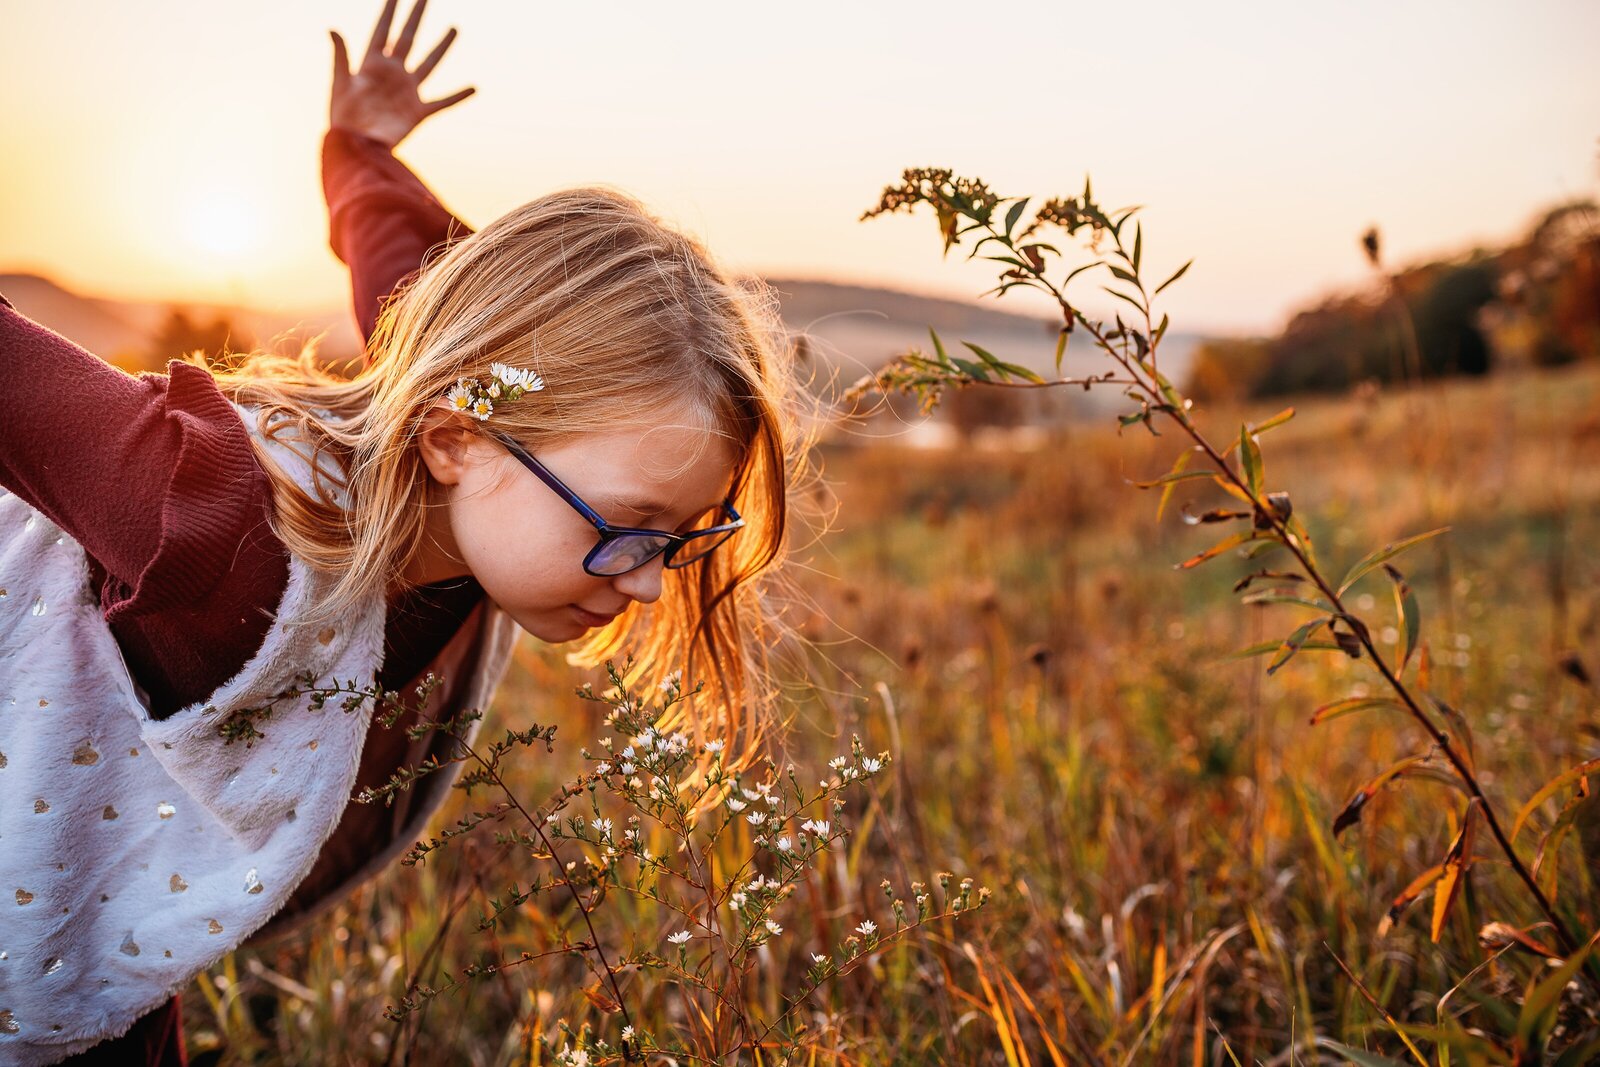 Child with long hair and glasses leaning forward to smell flower, arms outstretched behind.